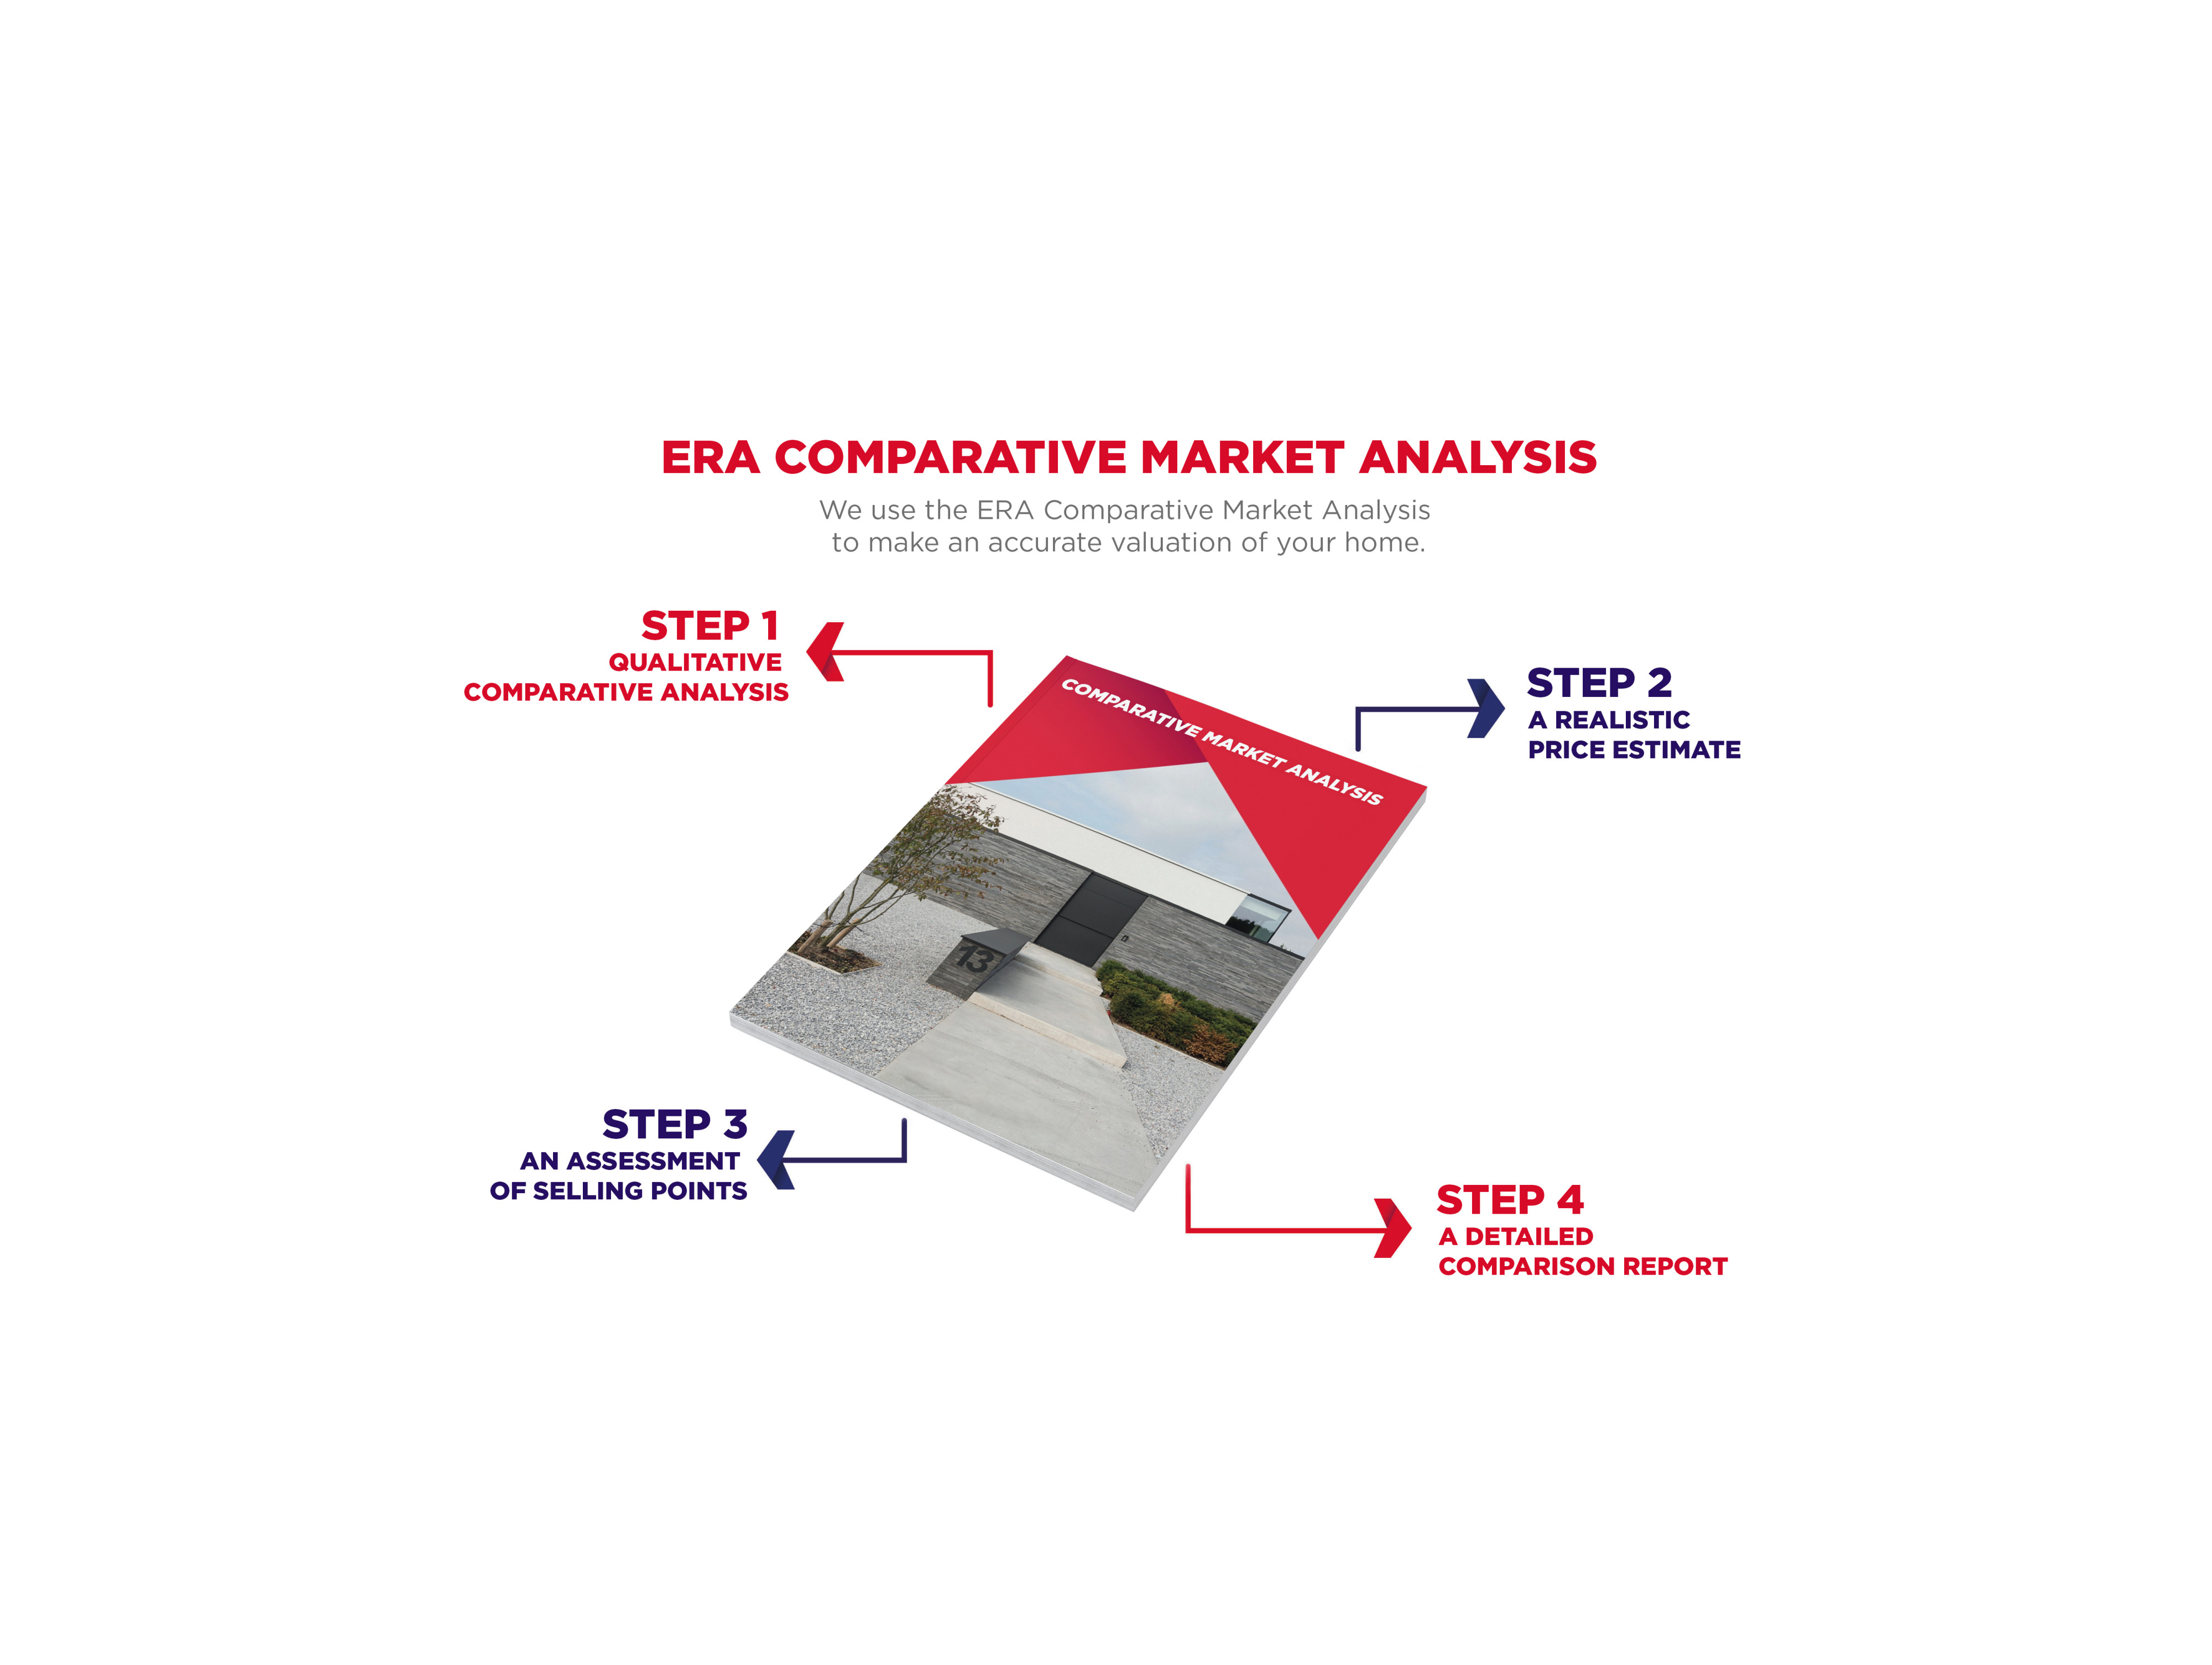 A visual overview of what an ERA Comparative Market Analysis is all about.